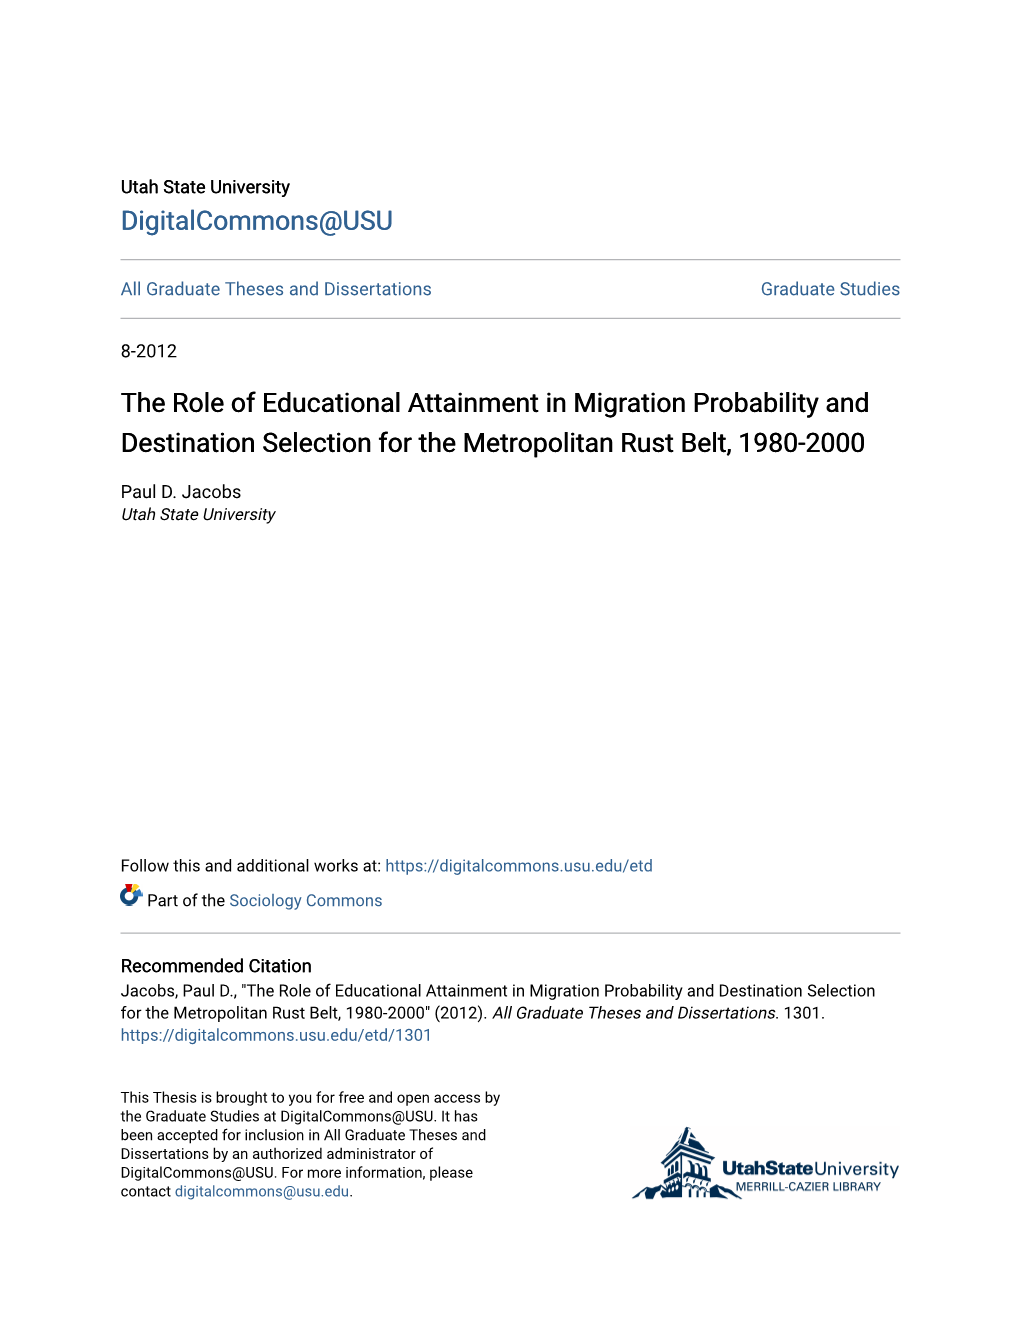 The Role of Educational Attainment in Migration Probability and Destination Selection for the Metropolitan Rust Belt, 1980-2000